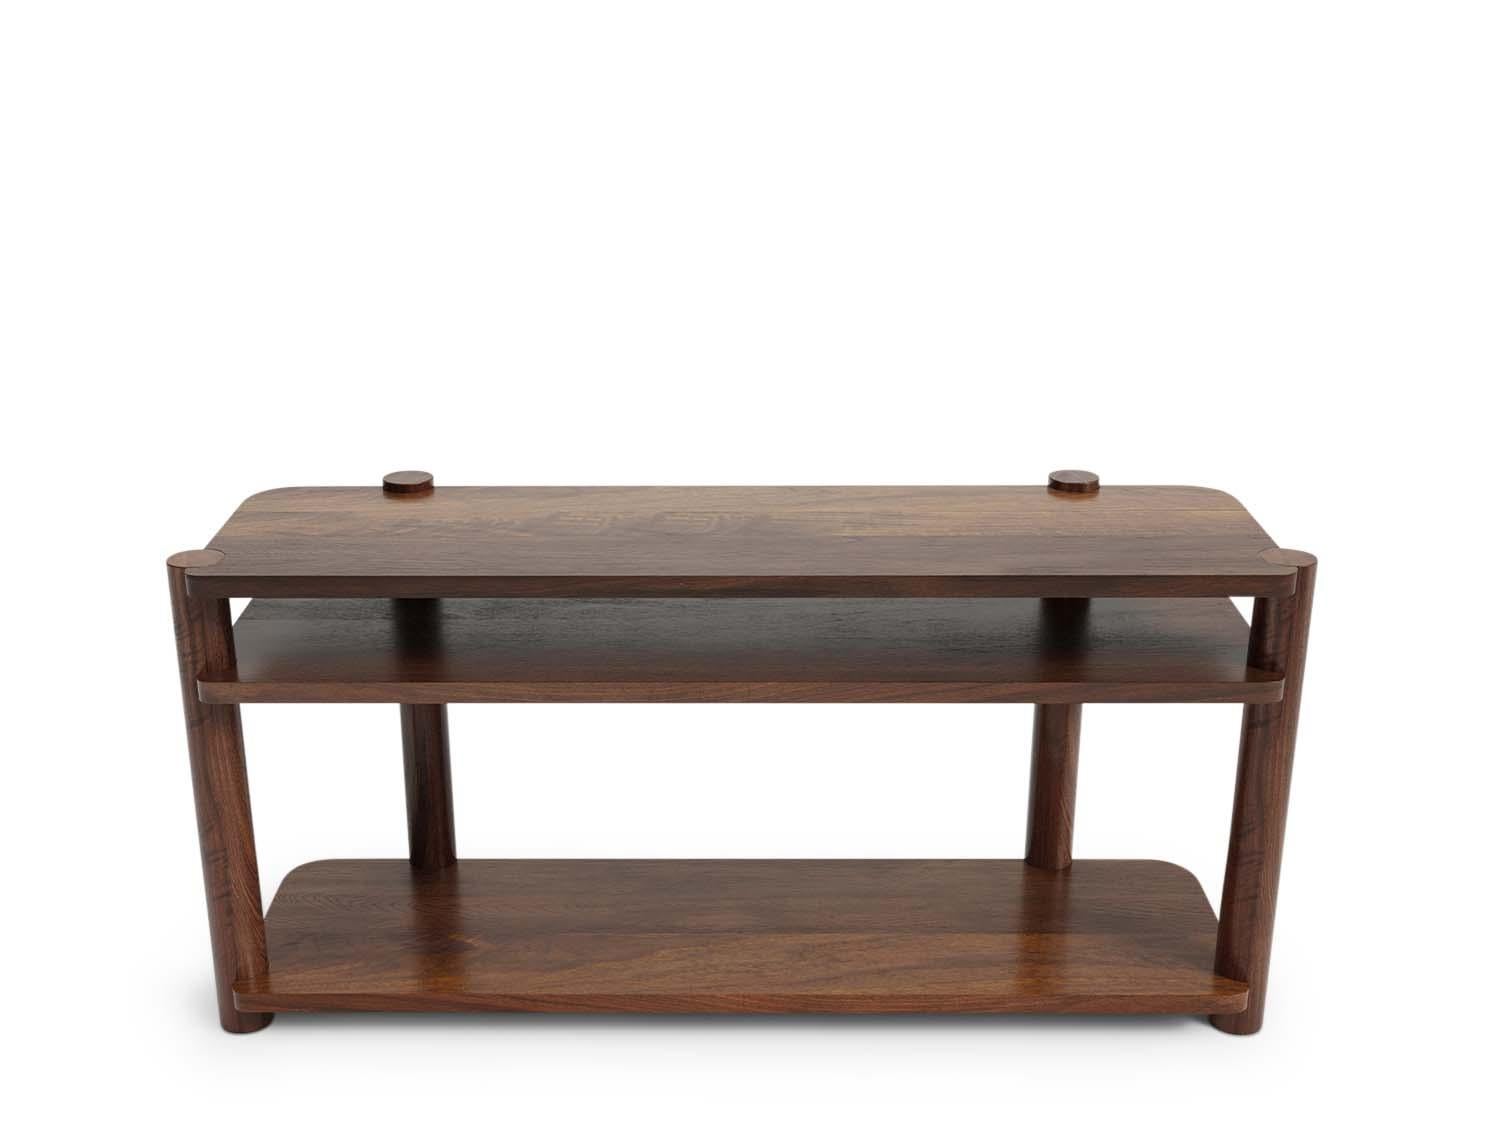 The Jalama Console pairs sturdy hardwood dowels with cascading selves that play with various soft corners.

The Lawson-Fenning Collection is designed and handmade in Los Angeles, California. Reach out to discover what options are currently in stock.